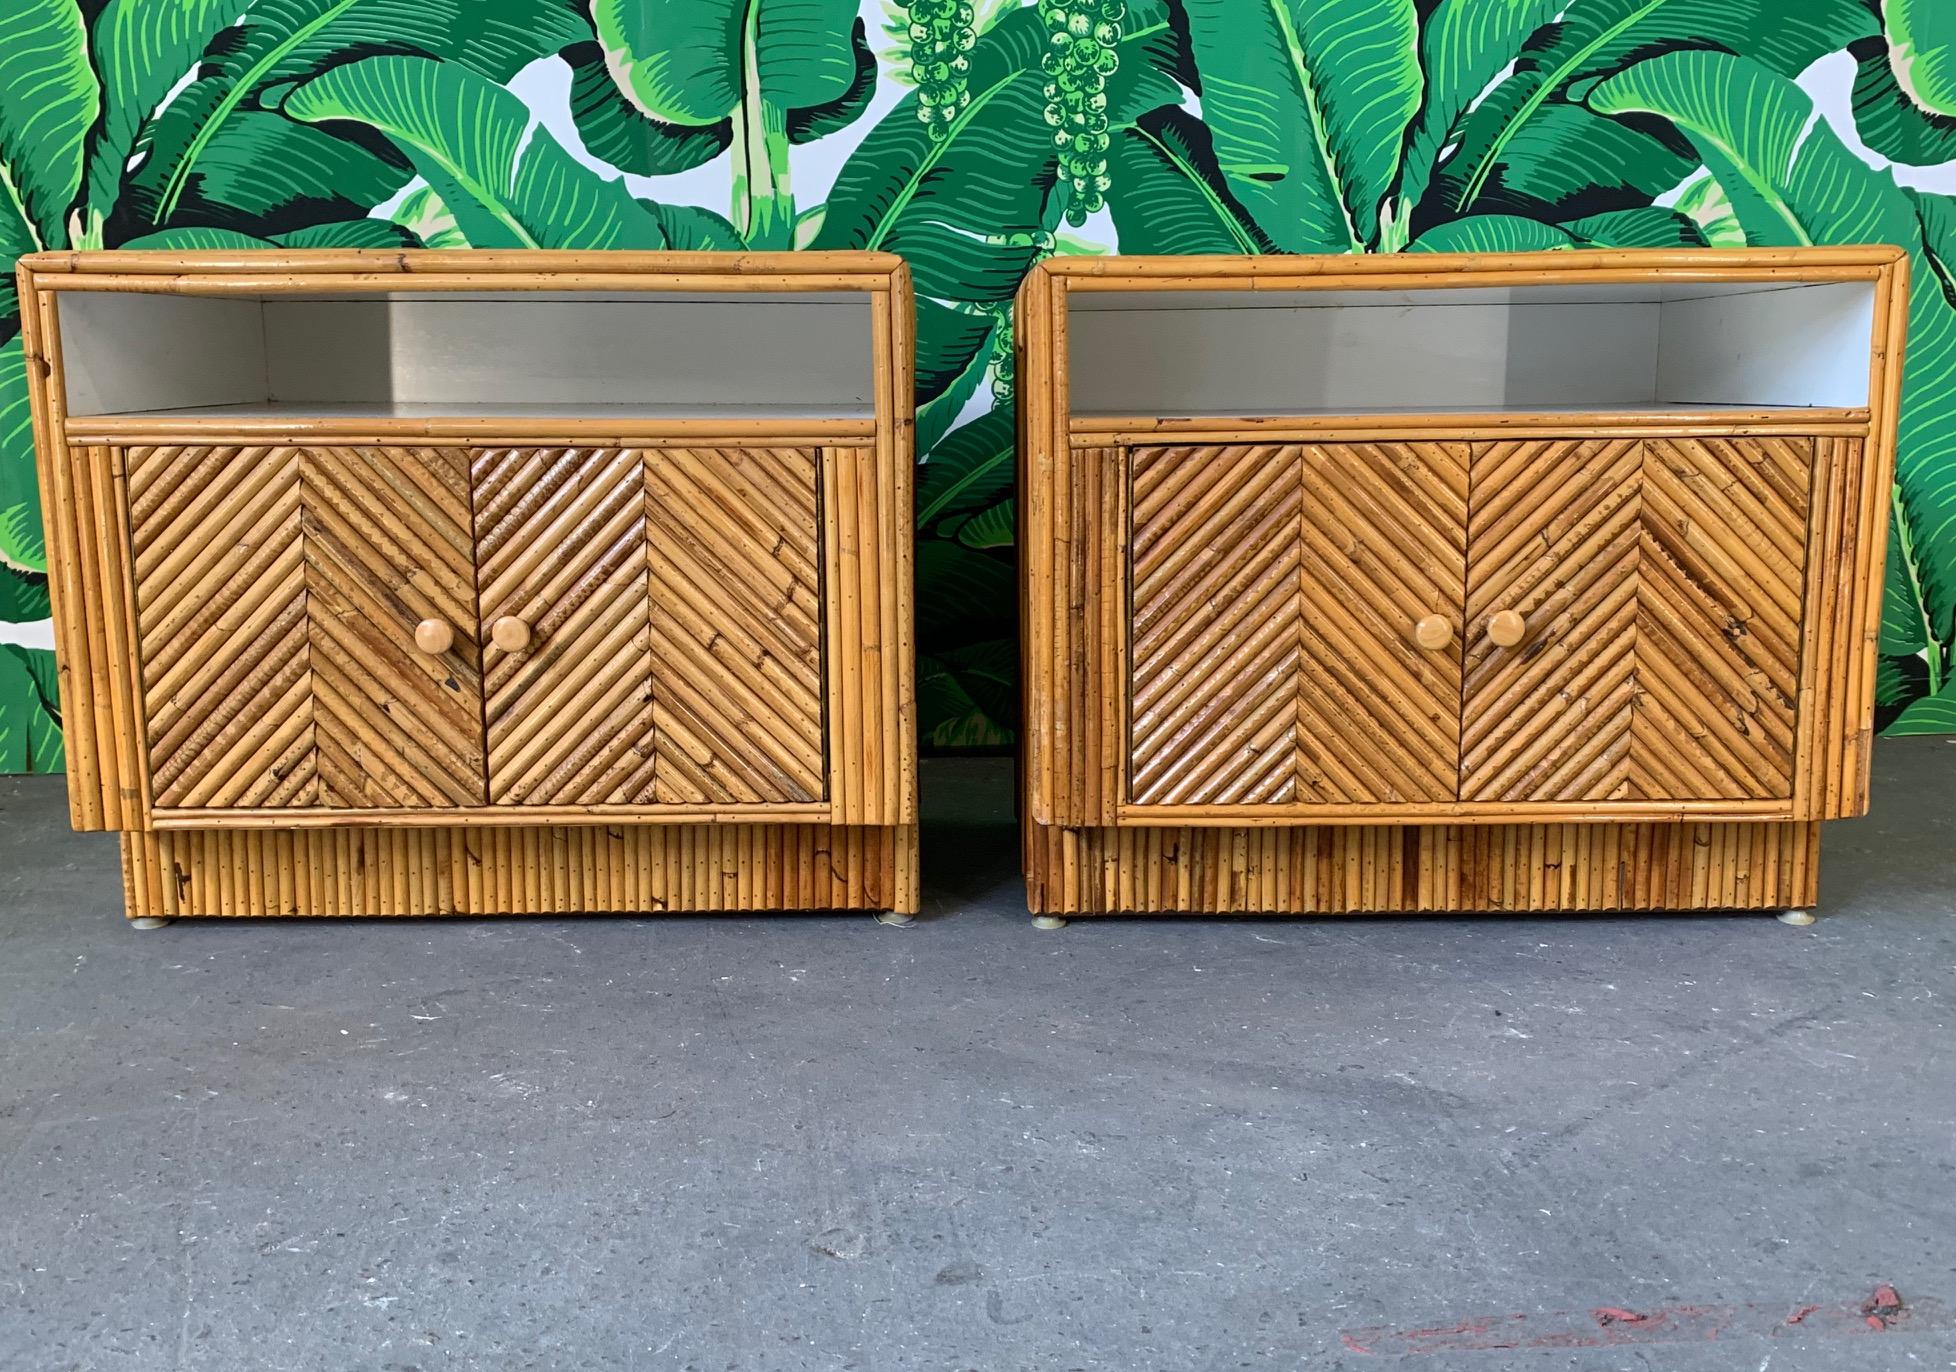 Pair of vintage nightstands fully wrapped in split reed rattan featuring a chevron design on door fronts. Very good condition with only very minor imperfections consistent with age.